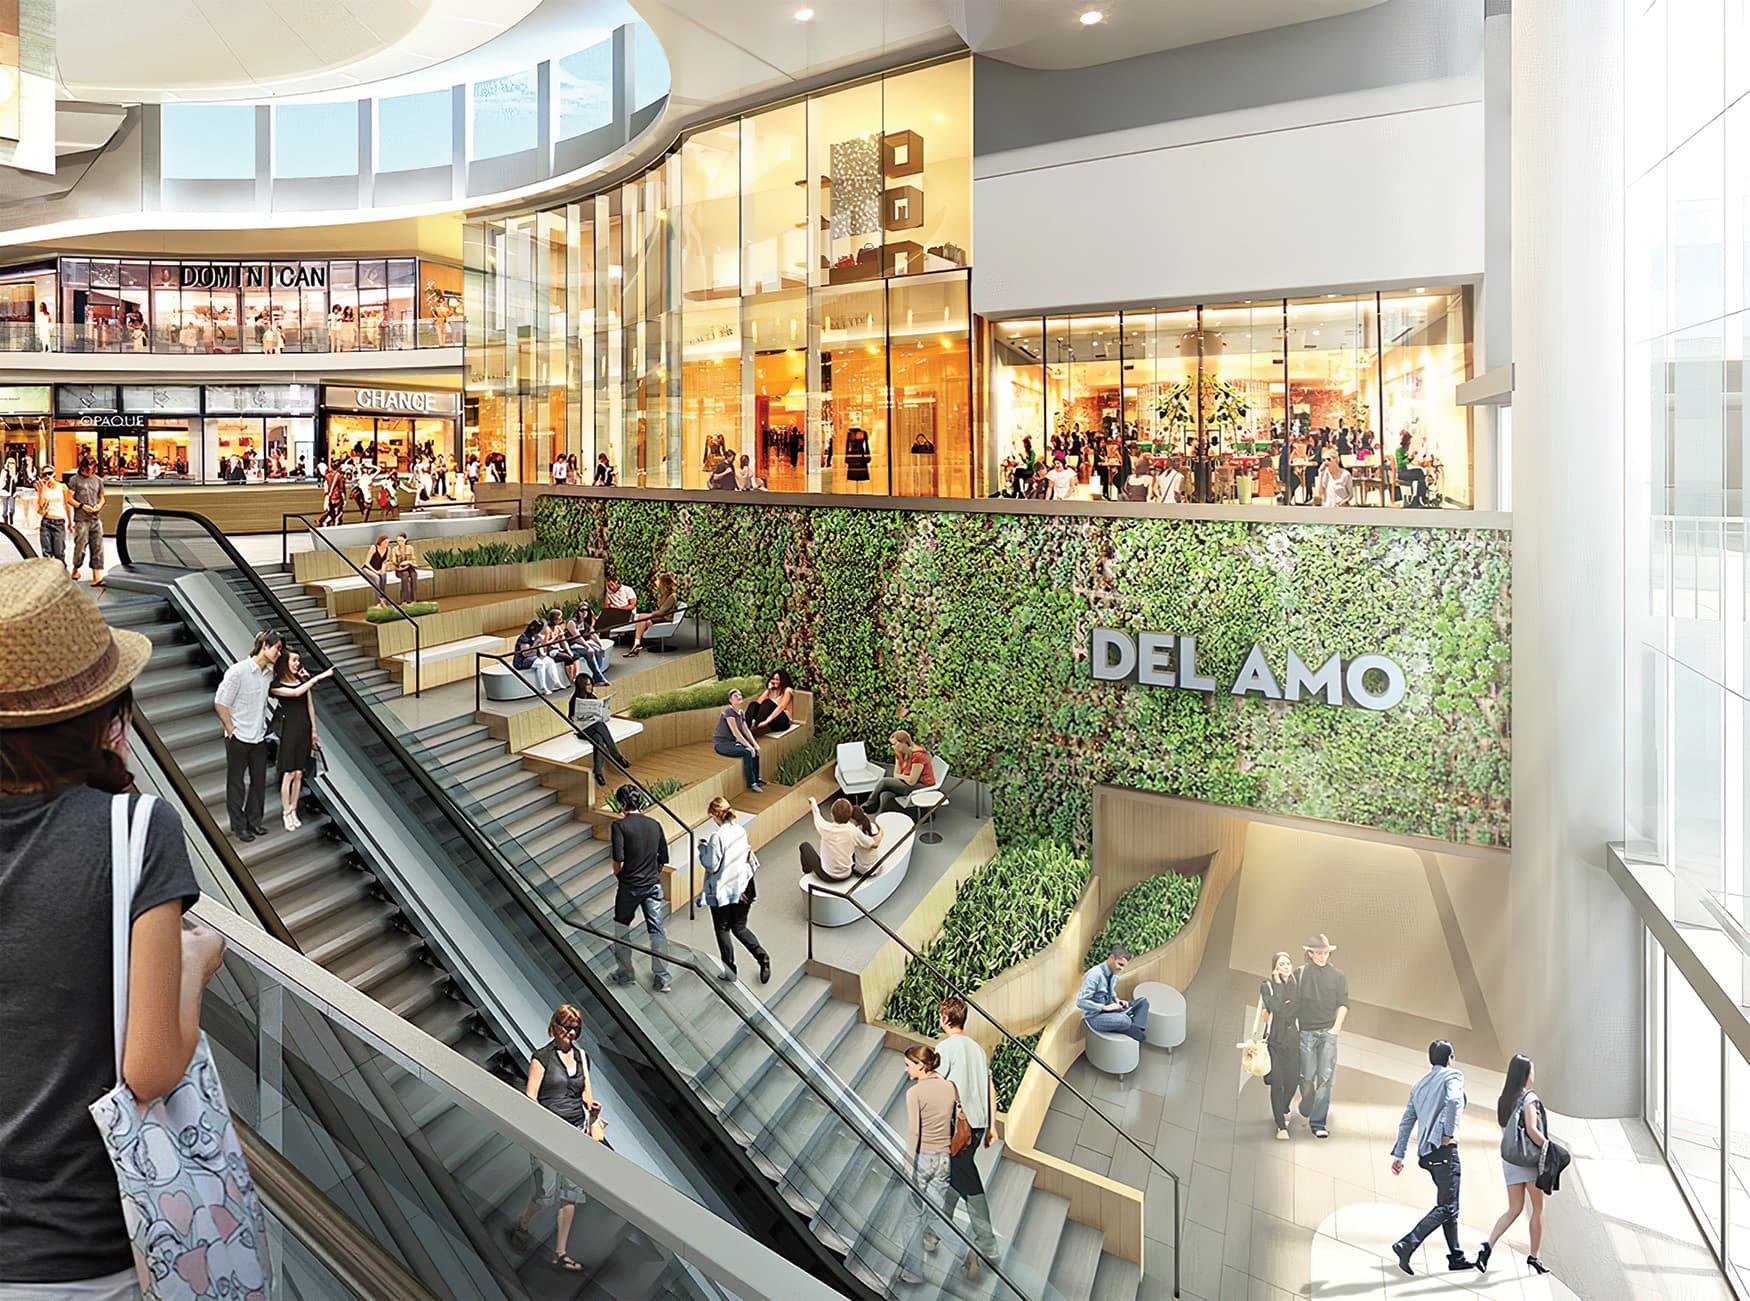 Del Amo Fashion Center located in Torrance, California. Project identity integrated into living wall.